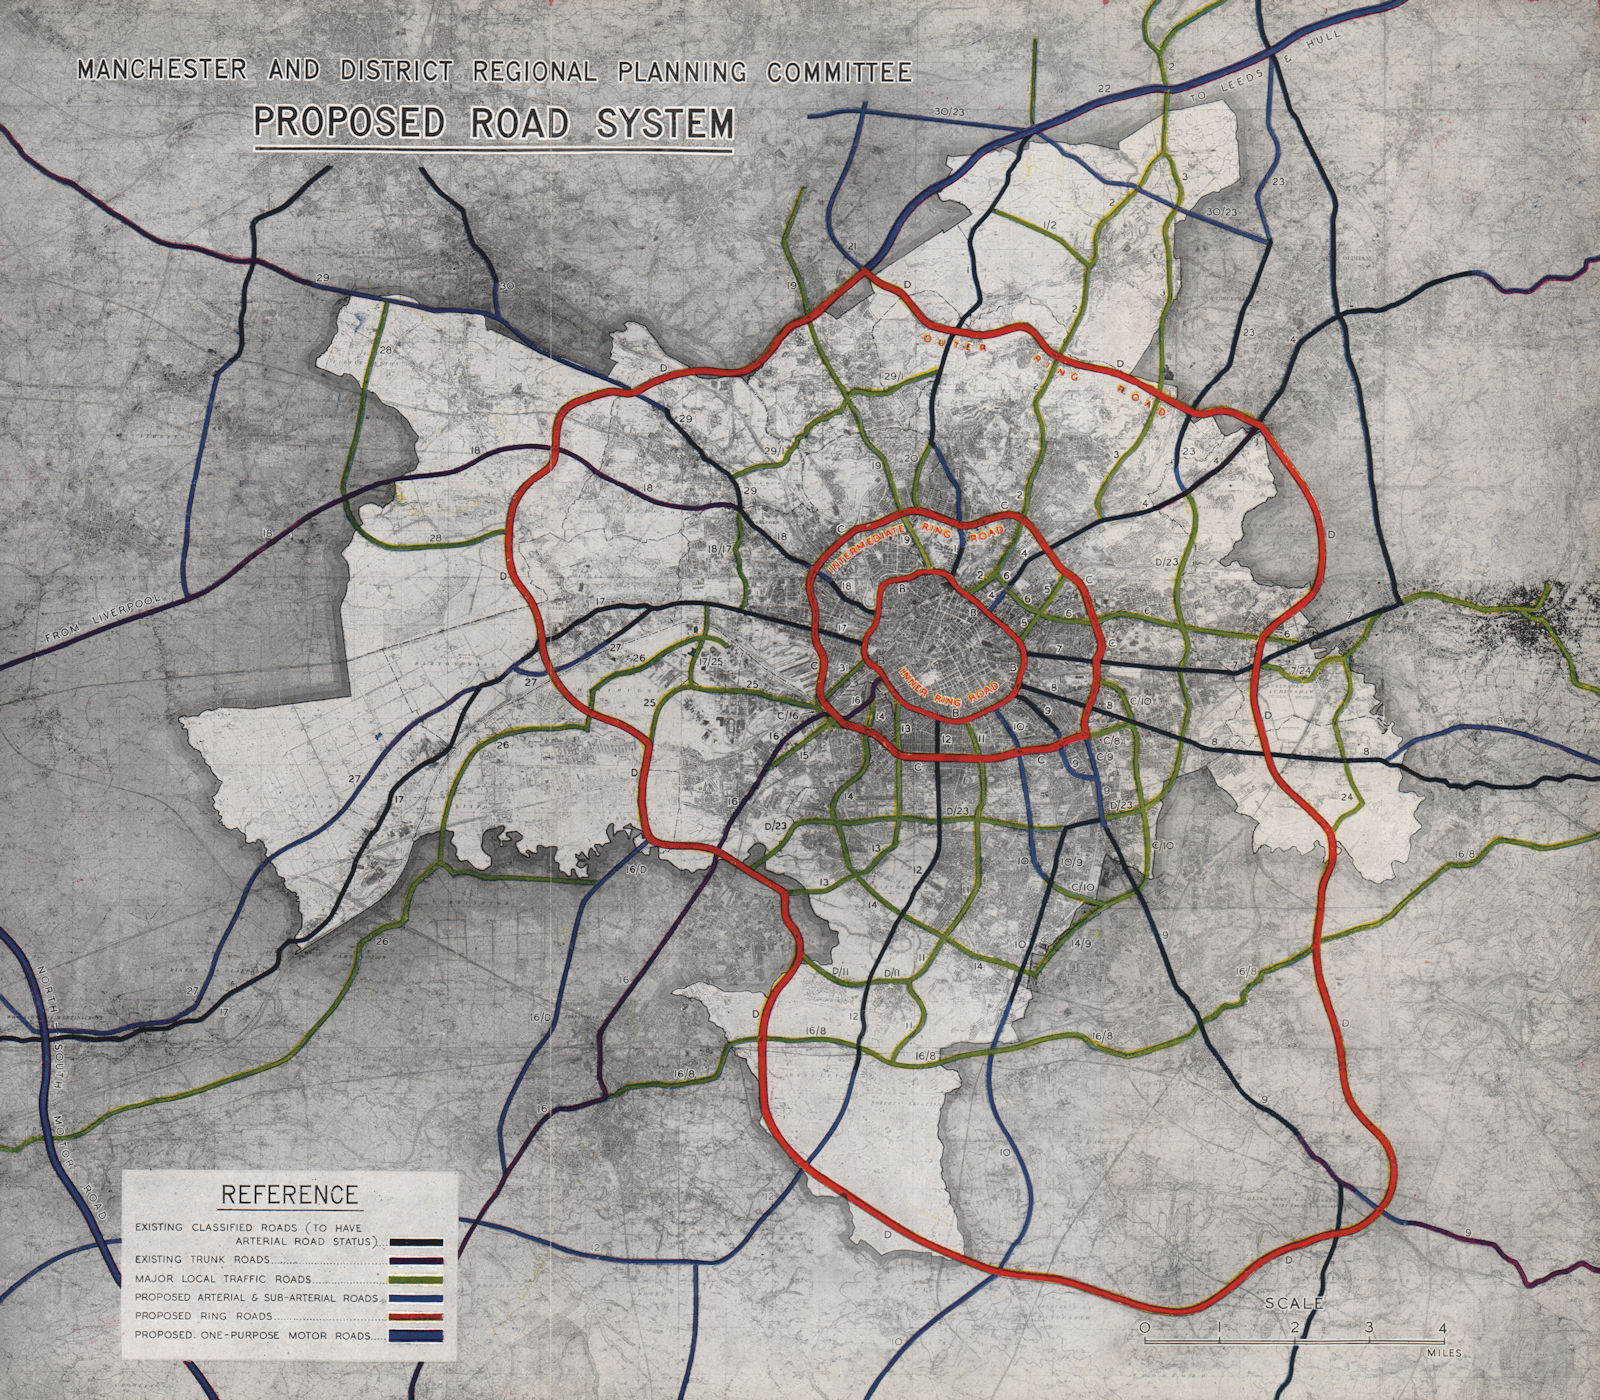 MANCHESTER PLAN 1945. Proposed Road System. Ring roads. Trunk roads 1945 map